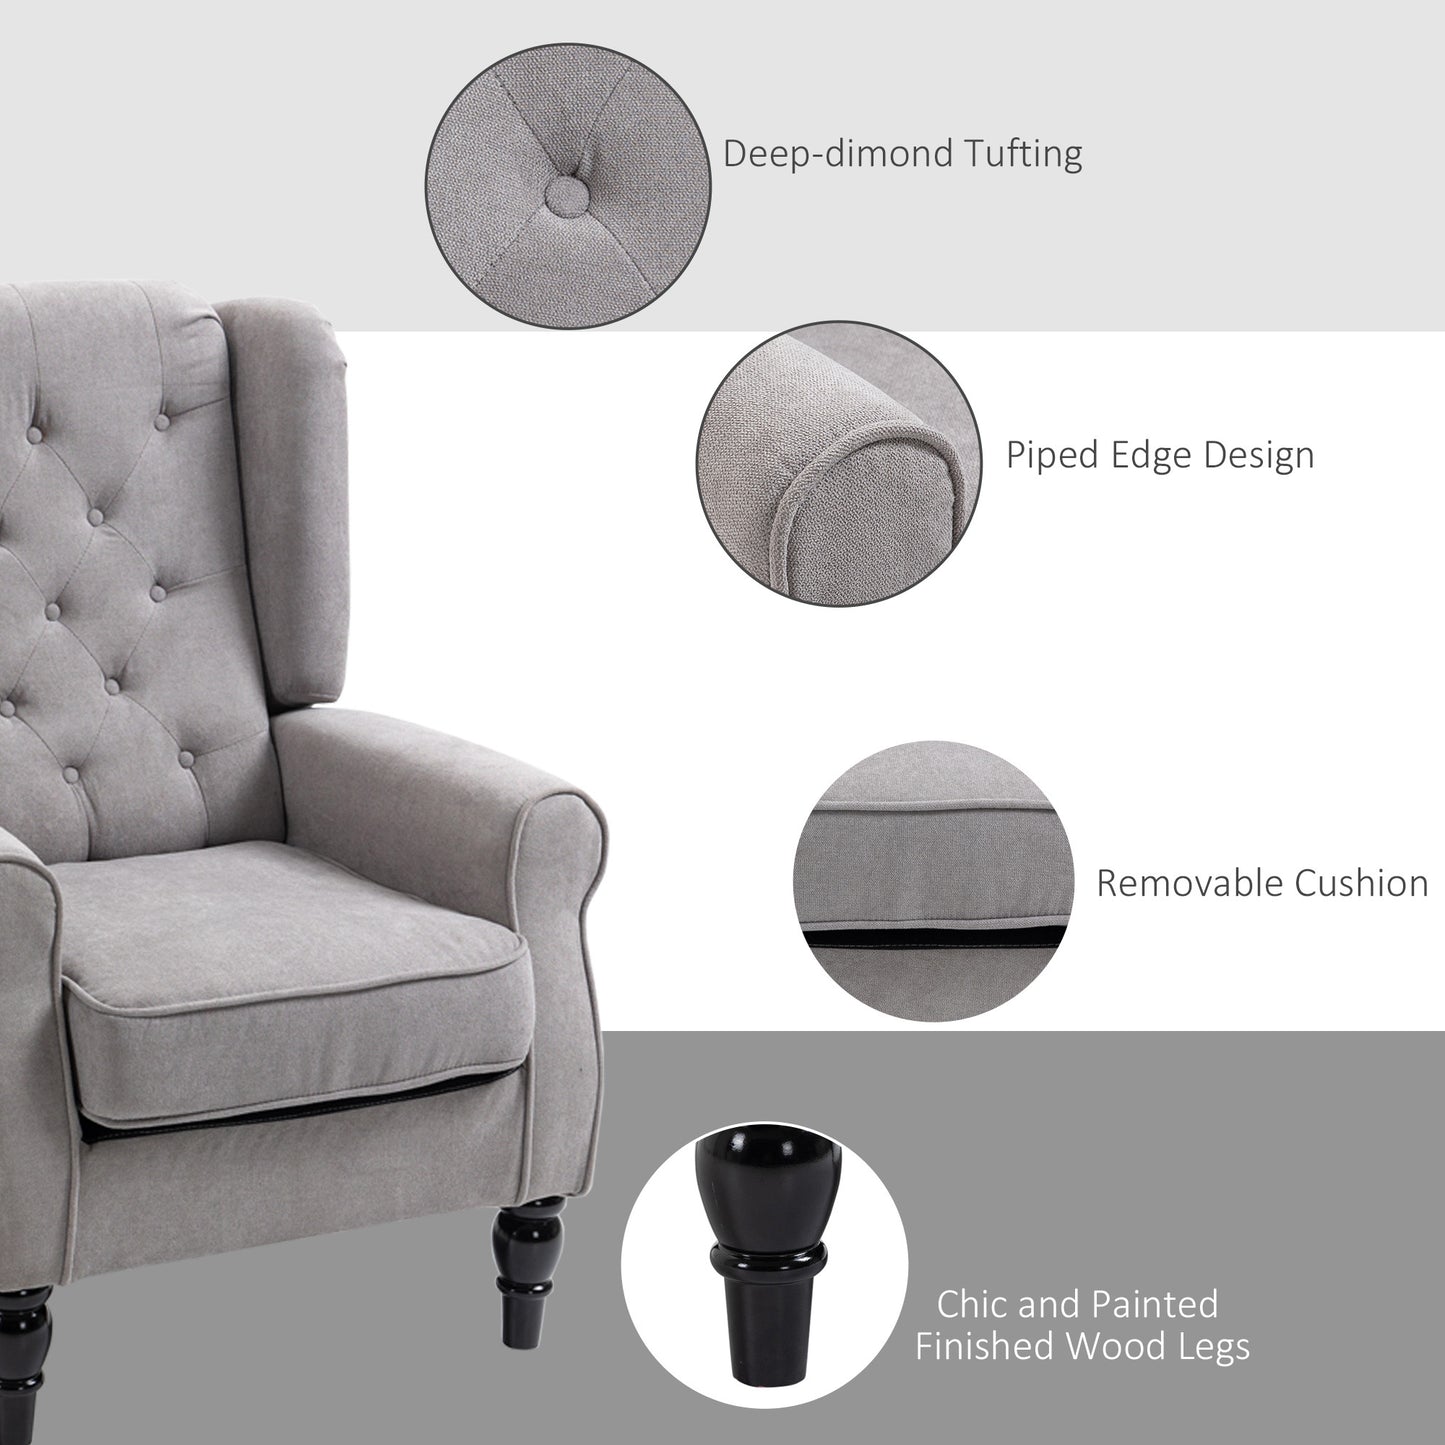 HOMCOM Wingback Armchair, Retro Accent Chair with Wooden Frame, Button Tufted, for Lounge or Bedroom, Grey